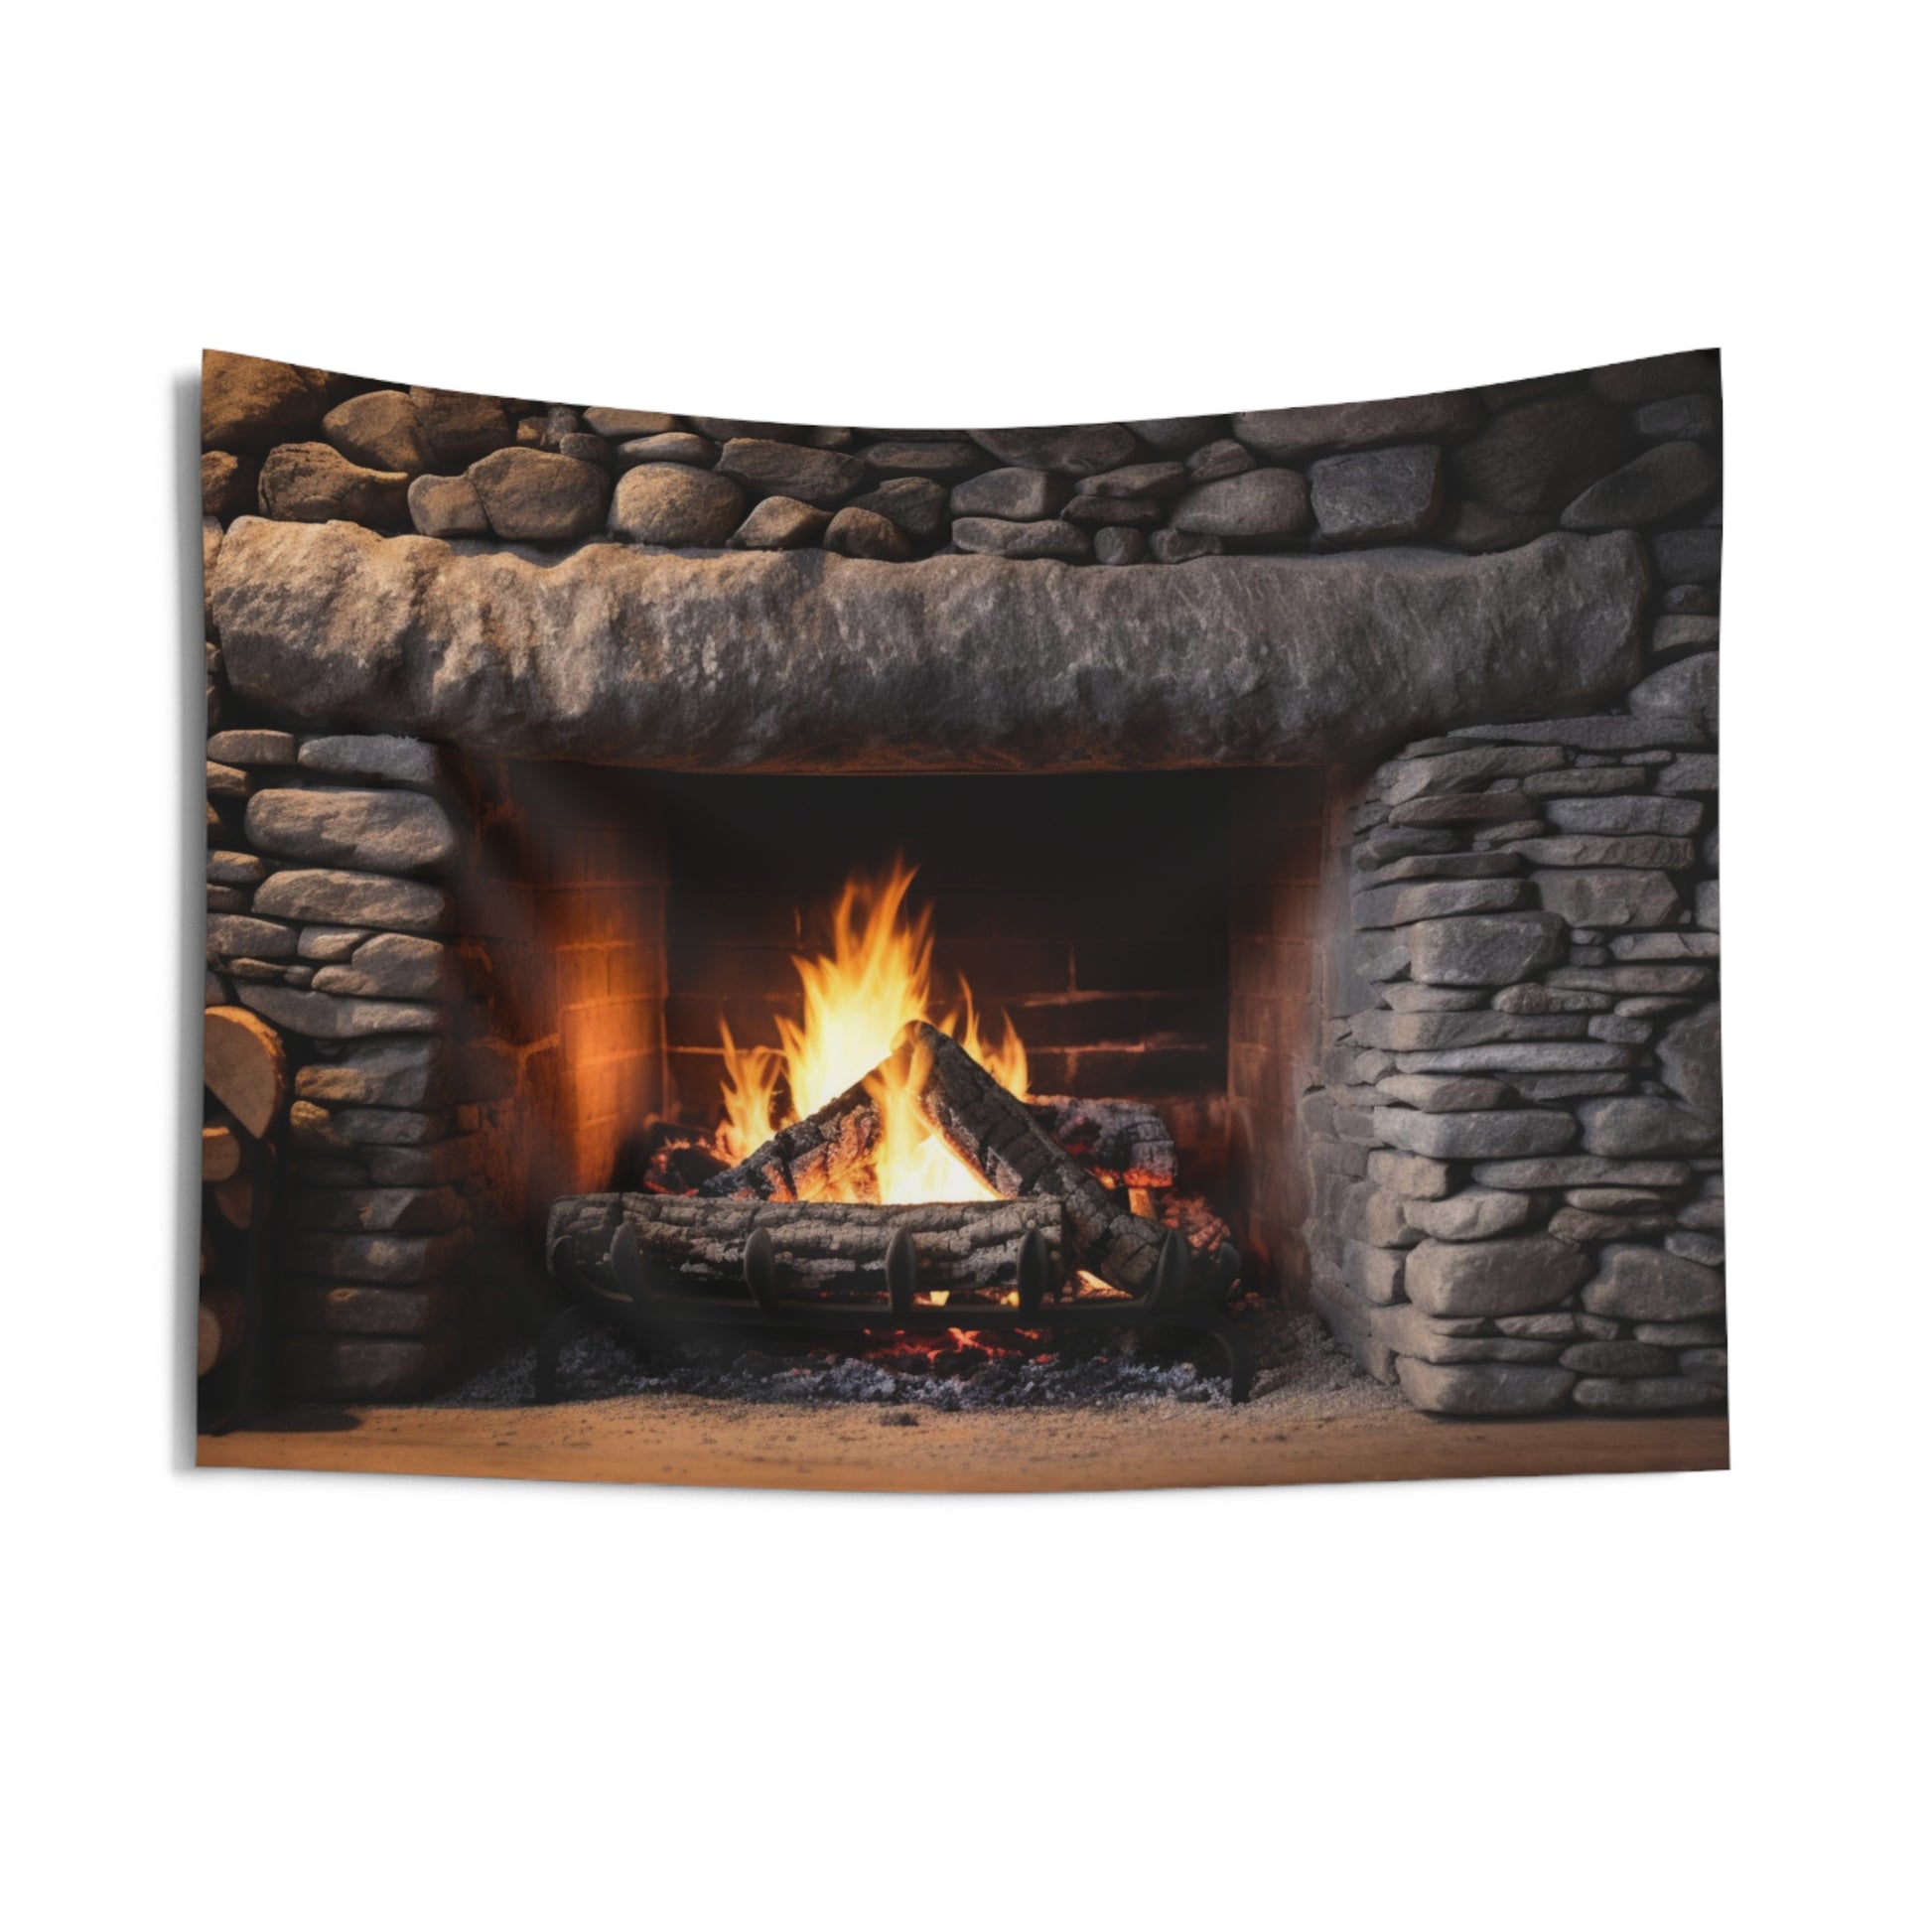 Fireplace Tapestry, Stone Fire Vintage Wall Art Hanging Cool Unique Landscape Aesthetic Large Small Decor Bedroom College Dorm Room Starcove Fashion